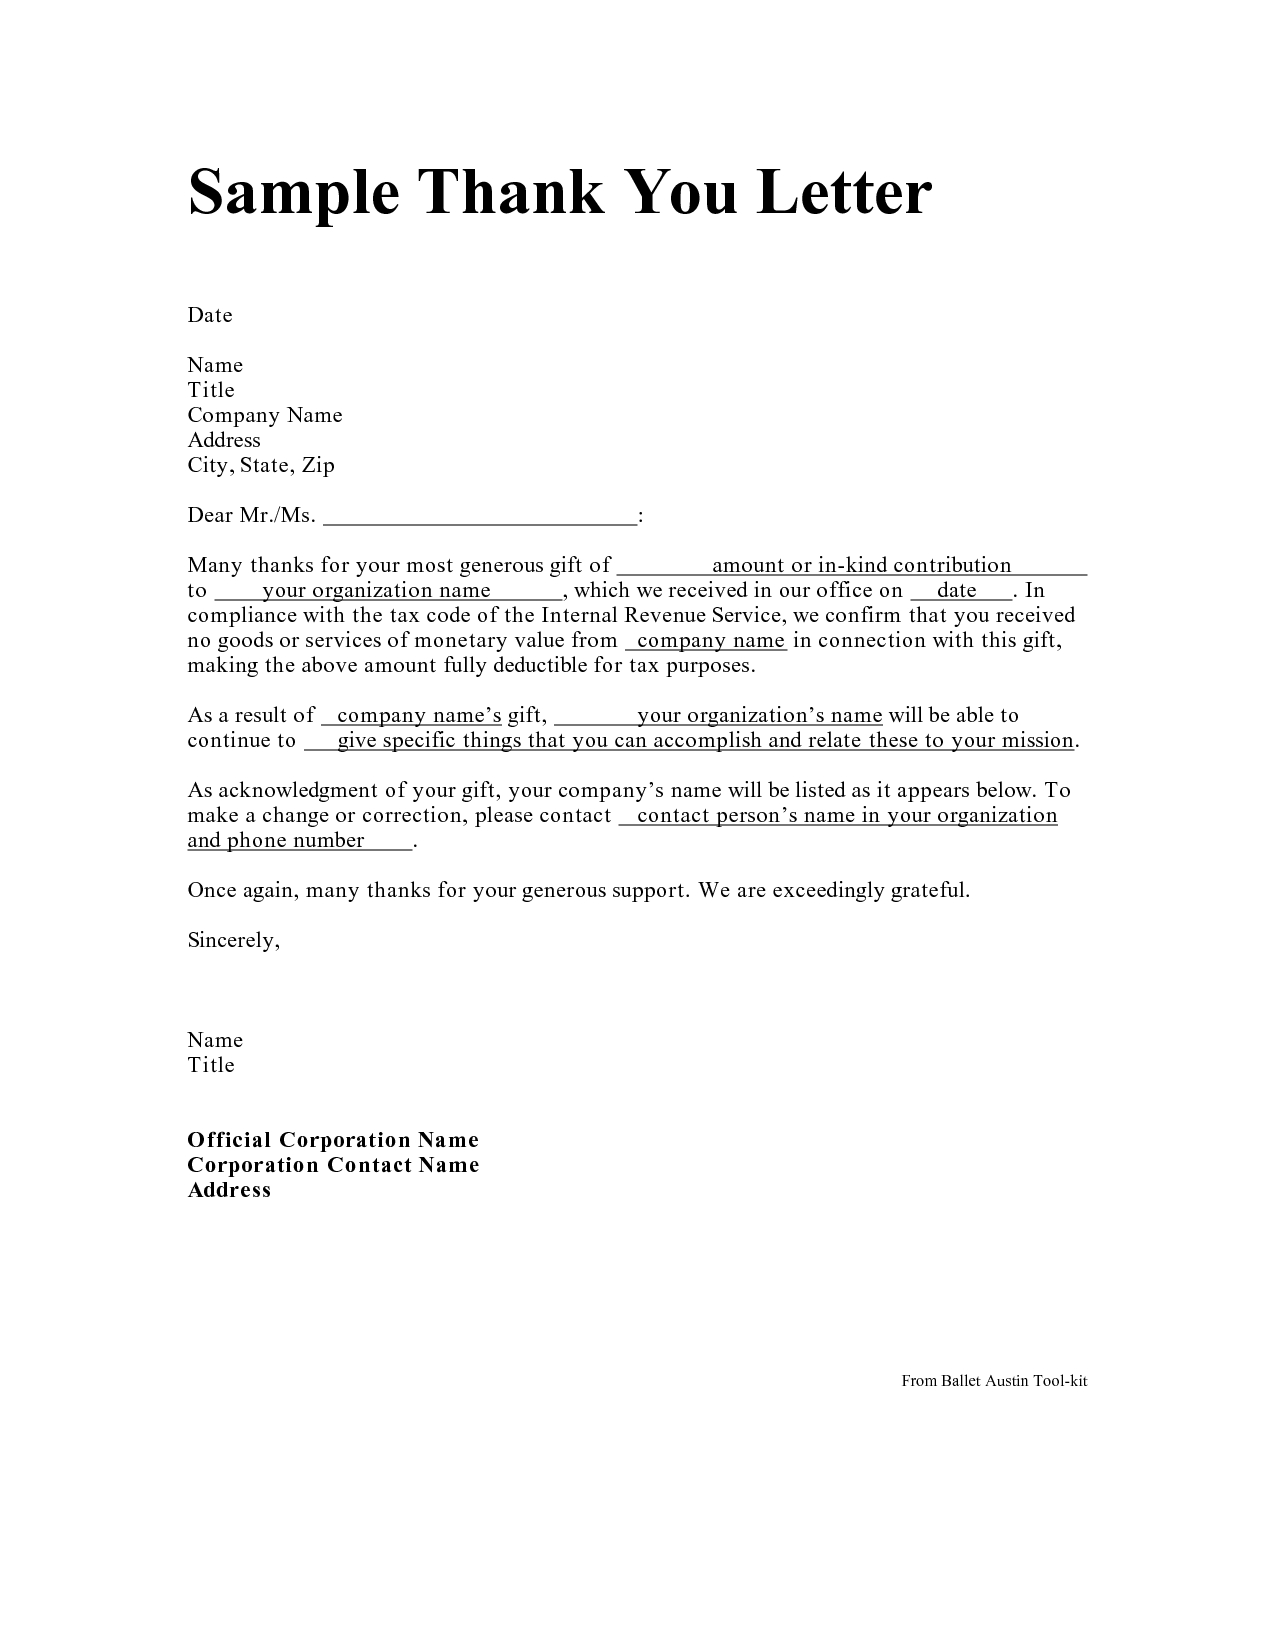 Veteran Letter Template - Personal Thank You Letter Personal Thank You Letter Samples